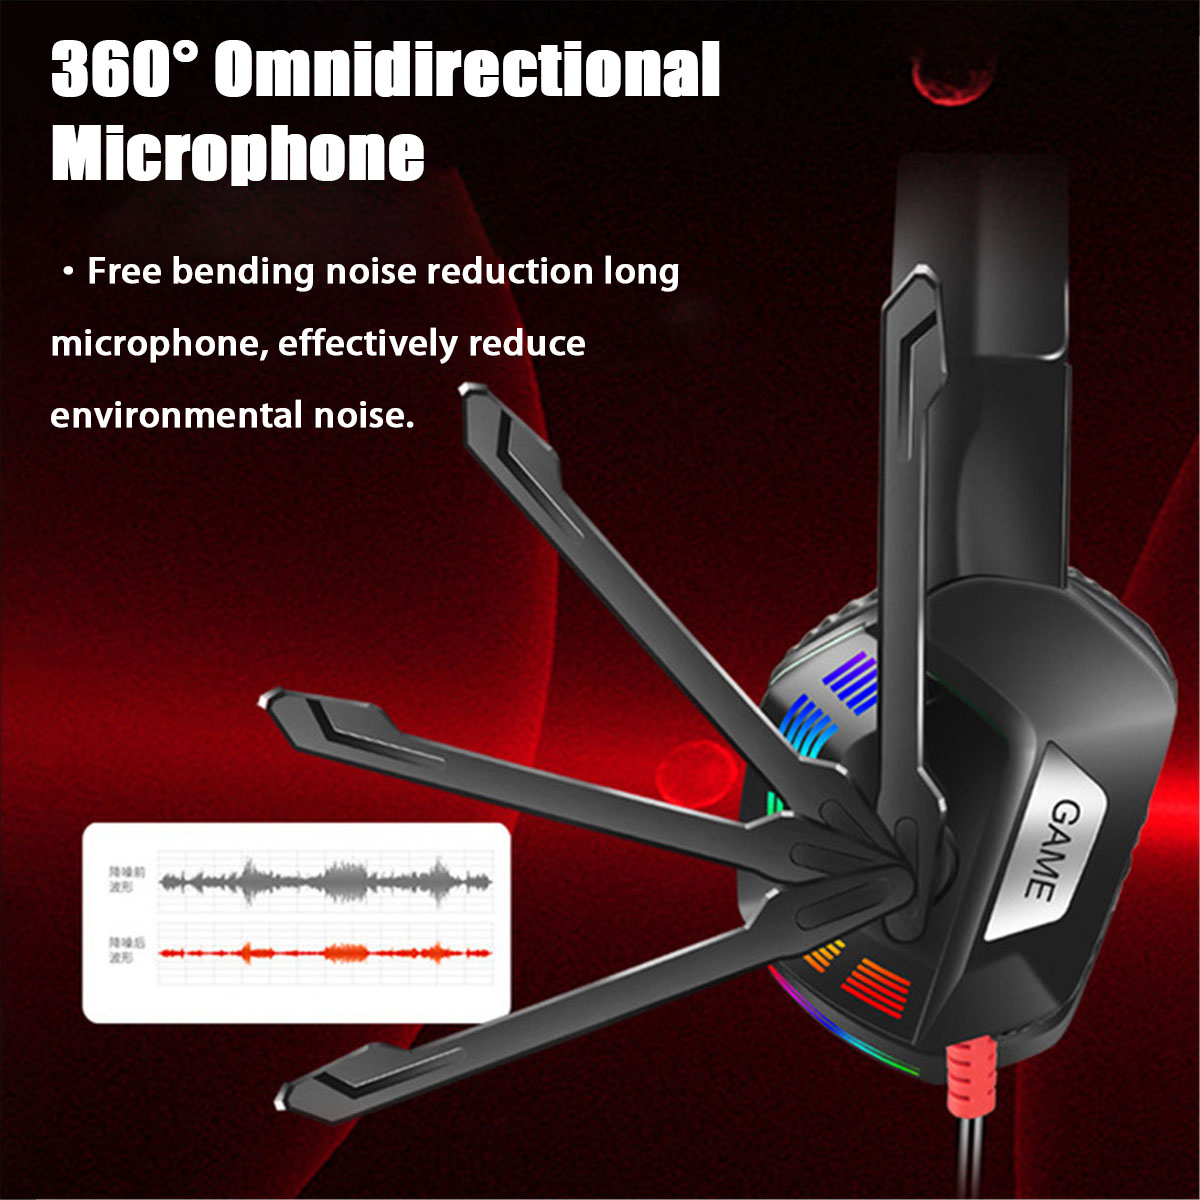 M1-Gaming-Headset-Surround-Sound-Music-Earphones-USB-71--35mm-Wired-RGB-Backlight-Game-Headphones-wi-1827492-3